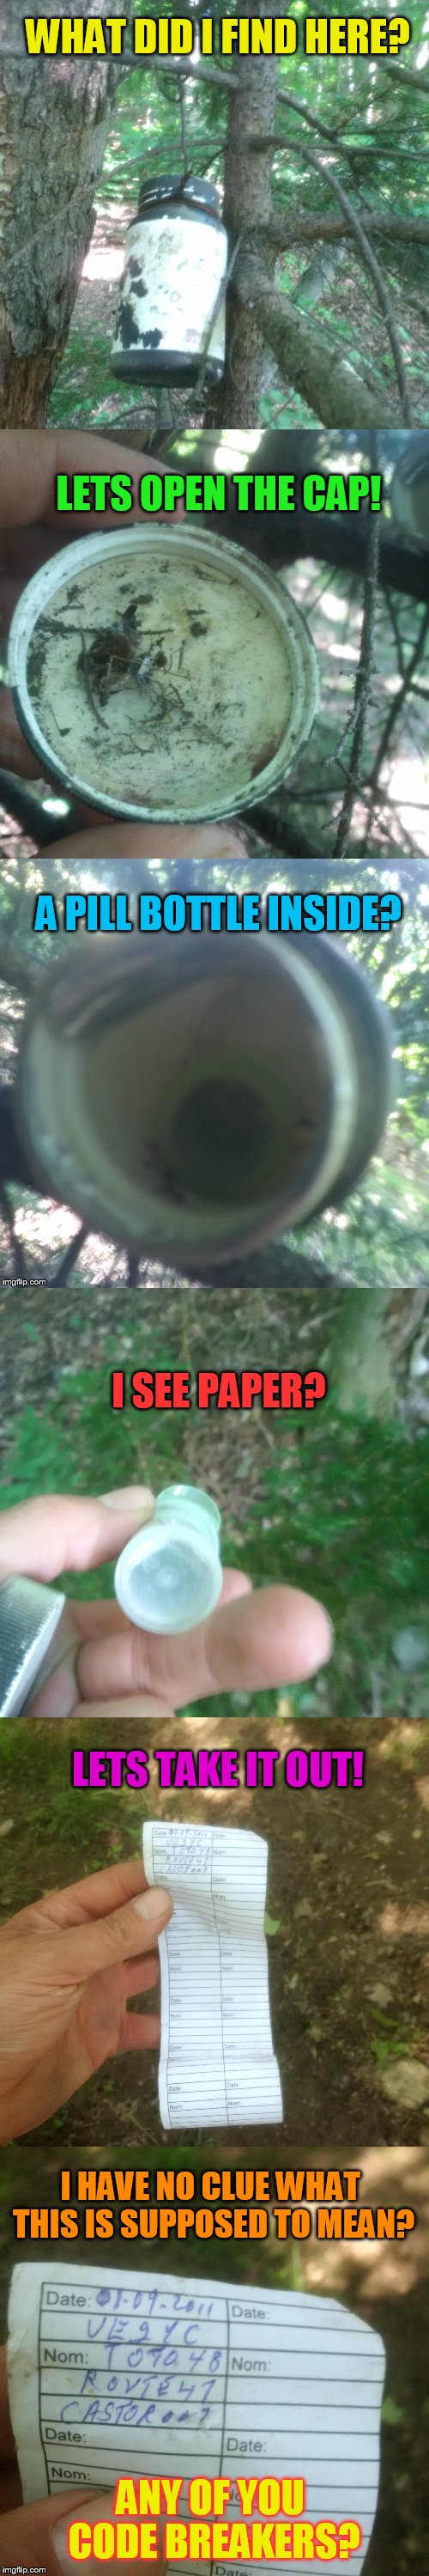 Treasure or ? | WHAT DID I FIND HERE? LETS OPEN THE CAP! A PILL BOTTLE INSIDE? I SEE PAPER? LETS TAKE IT OUT! I HAVE NO CLUE WHAT THIS IS SUPPOSED TO MEAN? ANY OF YOU CODE BREAKERS? | image tagged in treasure,found,bottle,funny meme,walking,woods | made w/ Imgflip meme maker